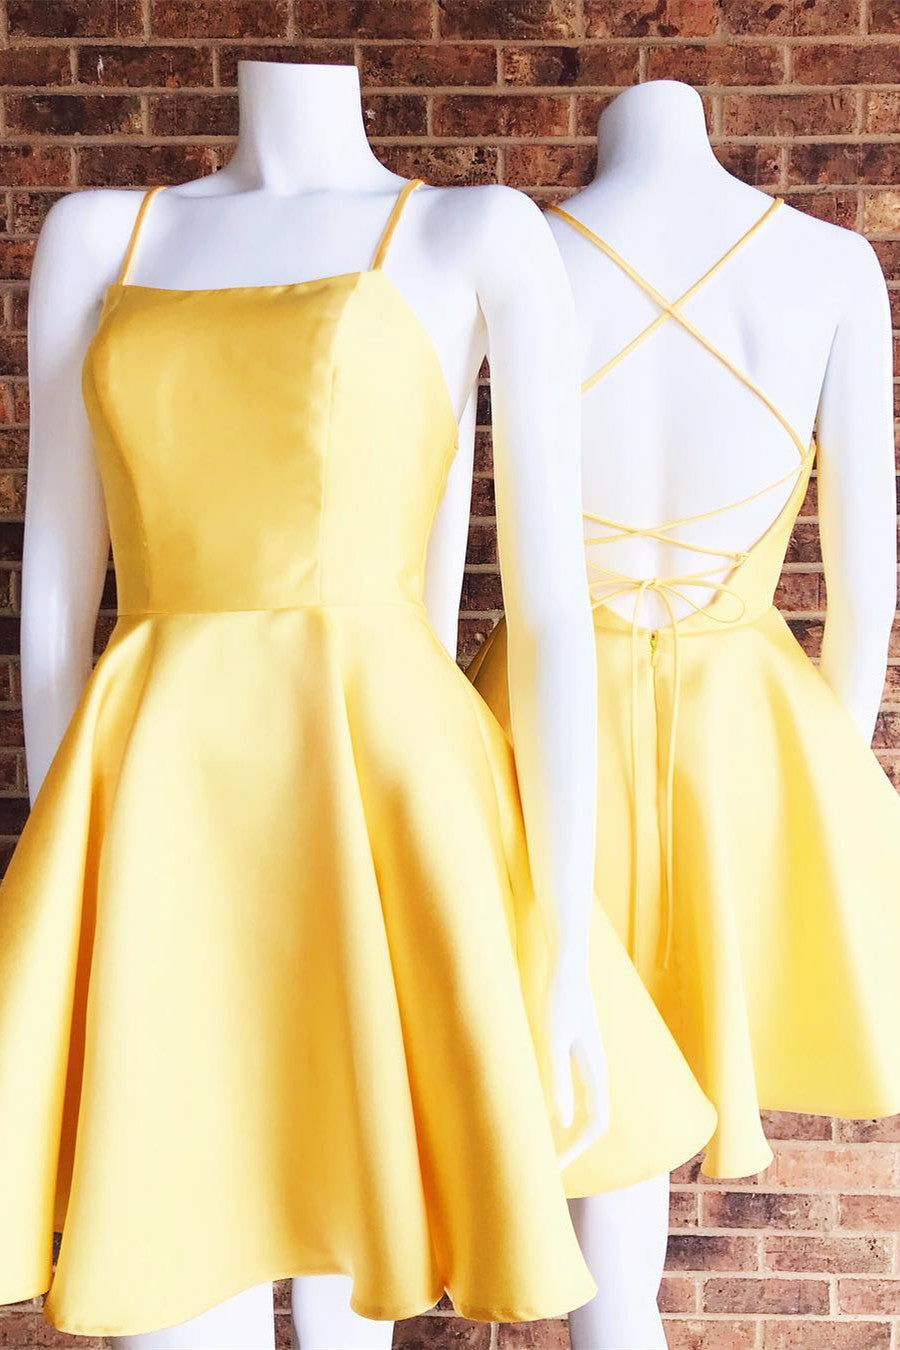 Modest Prom Dress, Simple Strappy Short Yellow Homecoming Dress